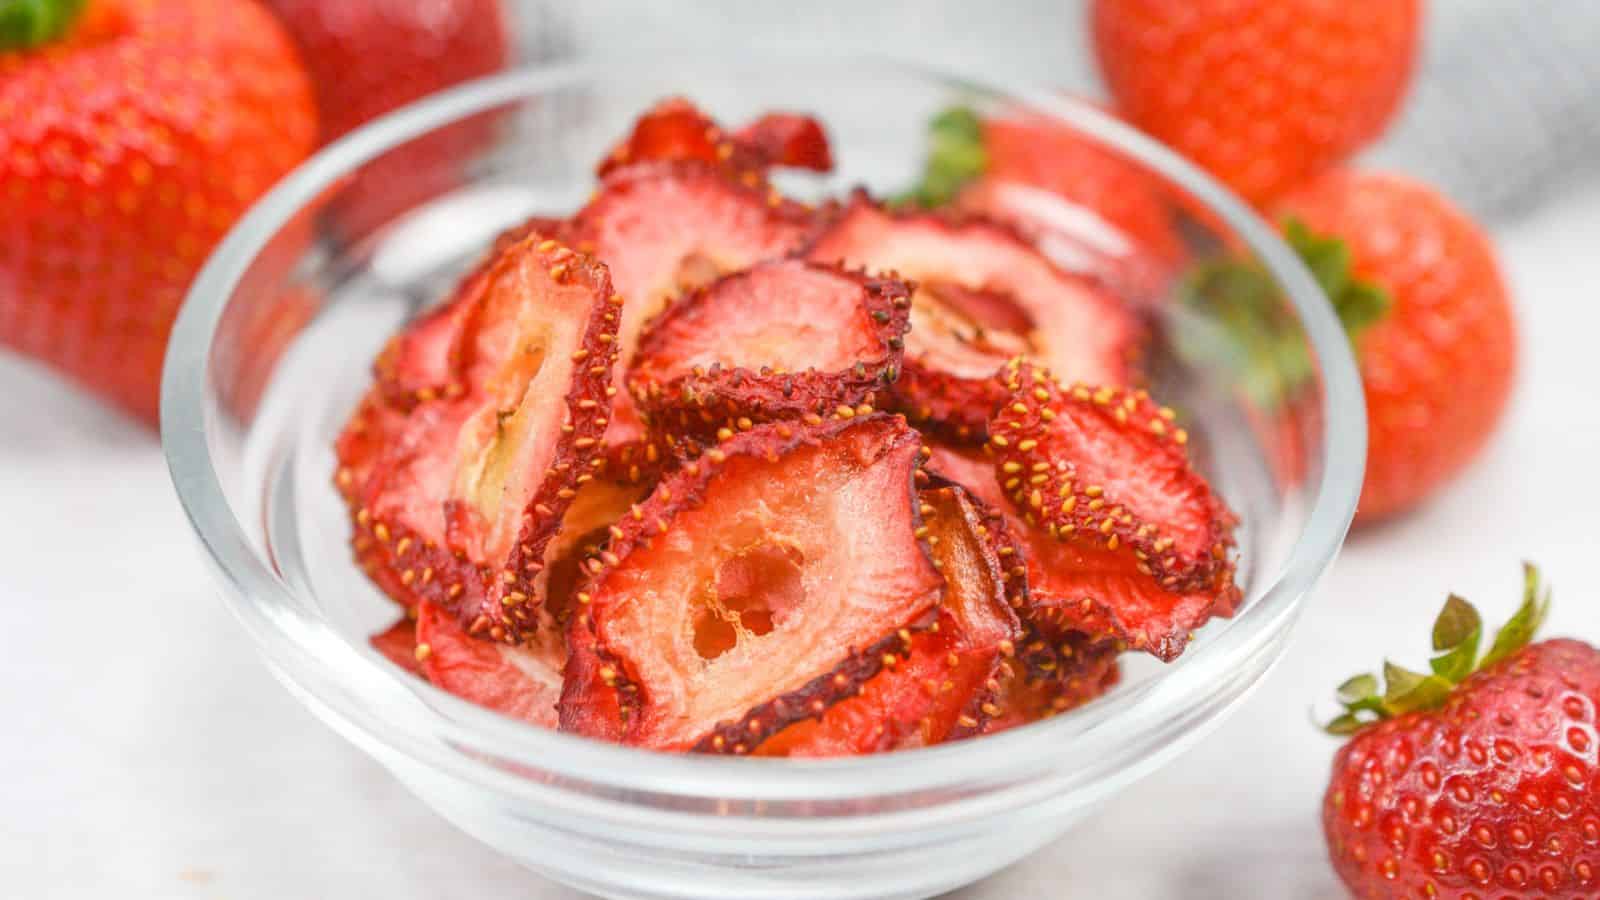 Dehydrated Strawberries in an Air Fryer.